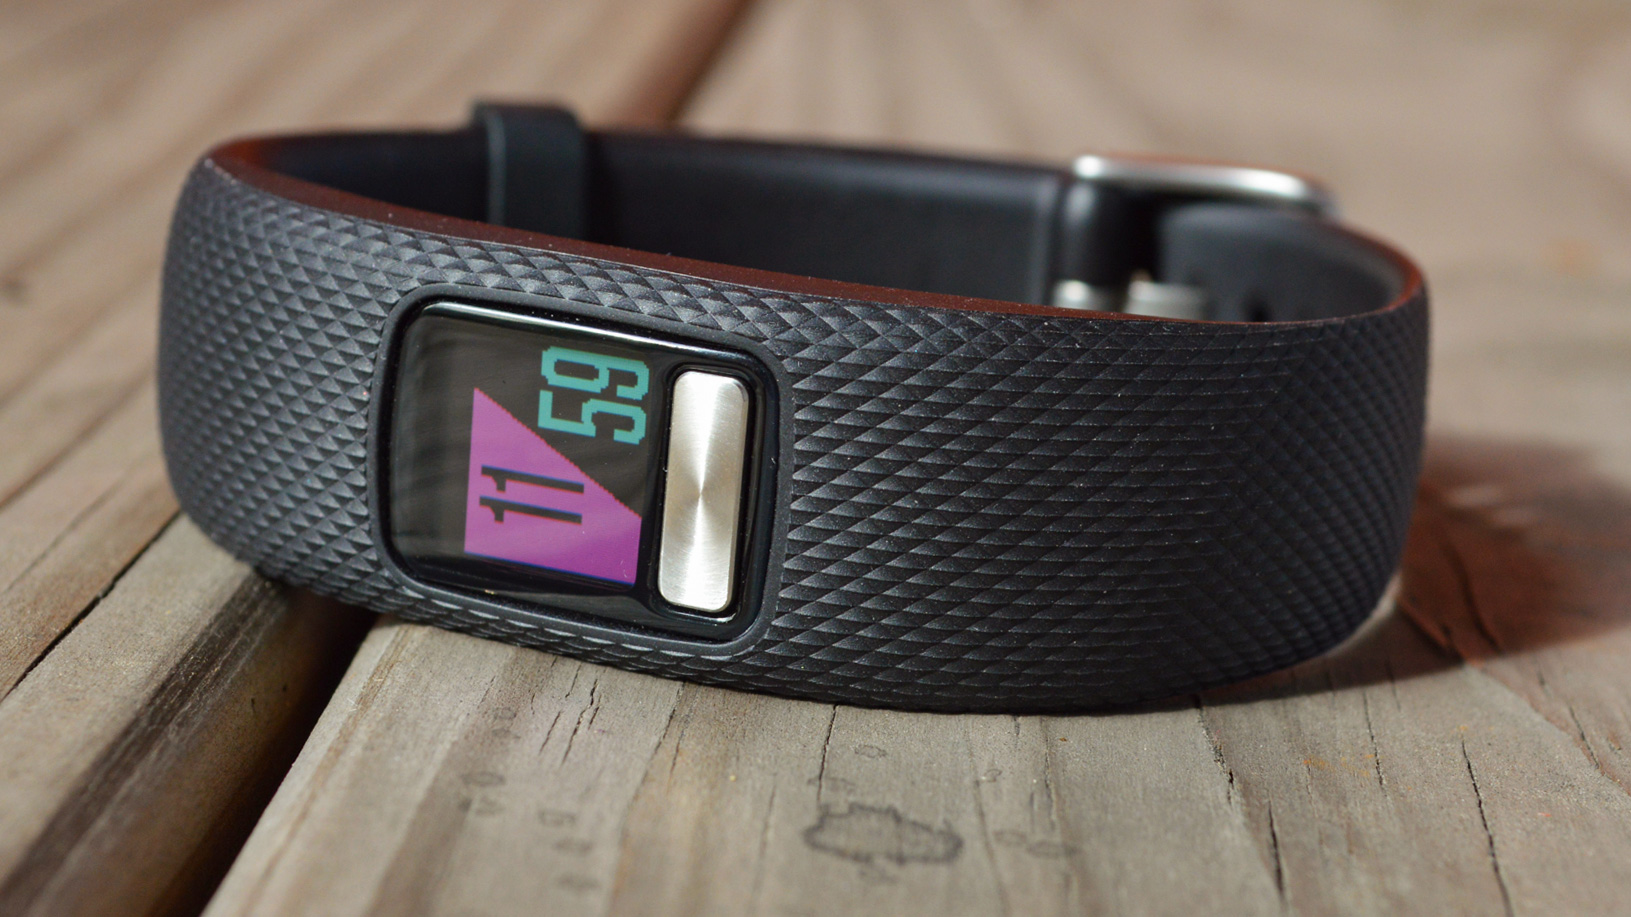 hylde Hændelse, begivenhed Madison Garmin Vivofit 4 review: A fitness tracker you'll never need to charge |  Tom's Guide